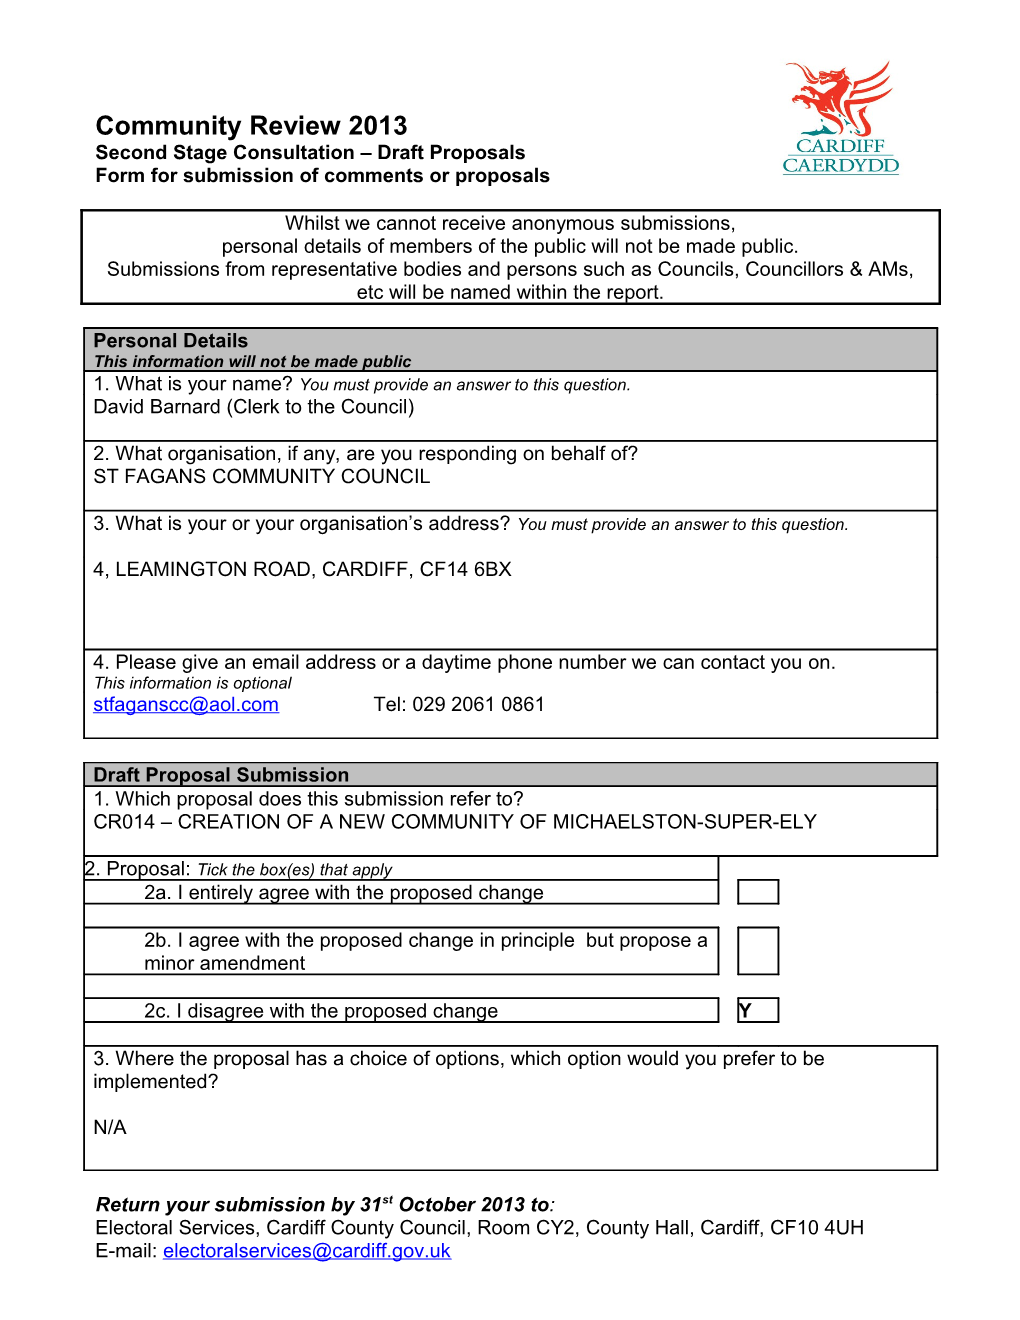 Form for Submission of Comments Or Proposals